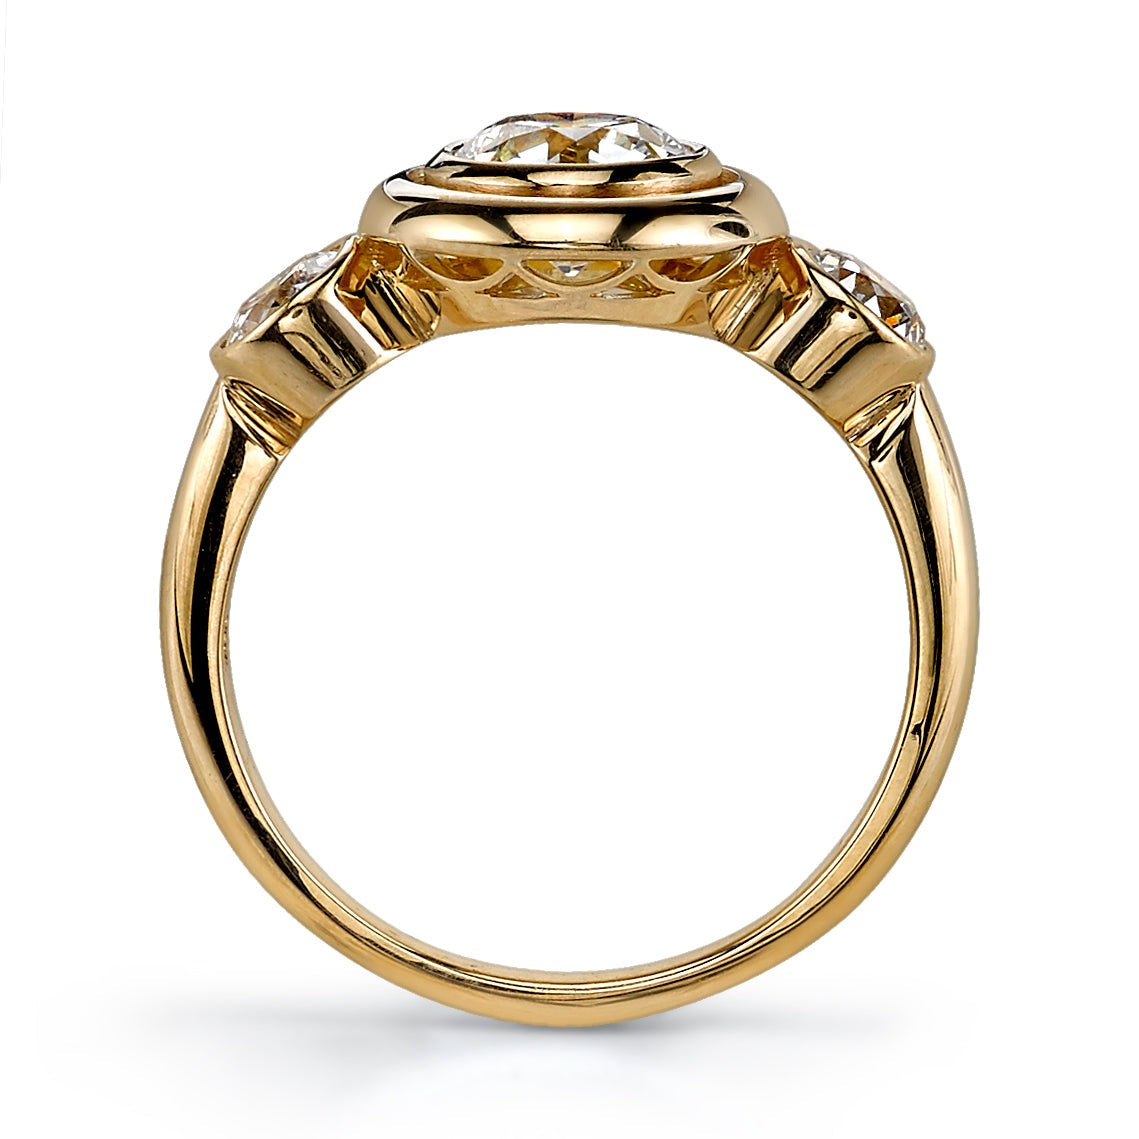 SINGLE STONE WAVERLY RING featuring 0.92ct J/VS1 EGL certified old European cut diamond with 0.50ctw old European cut accent diamonds set in a handcrafted 18K yellow gold mounting.